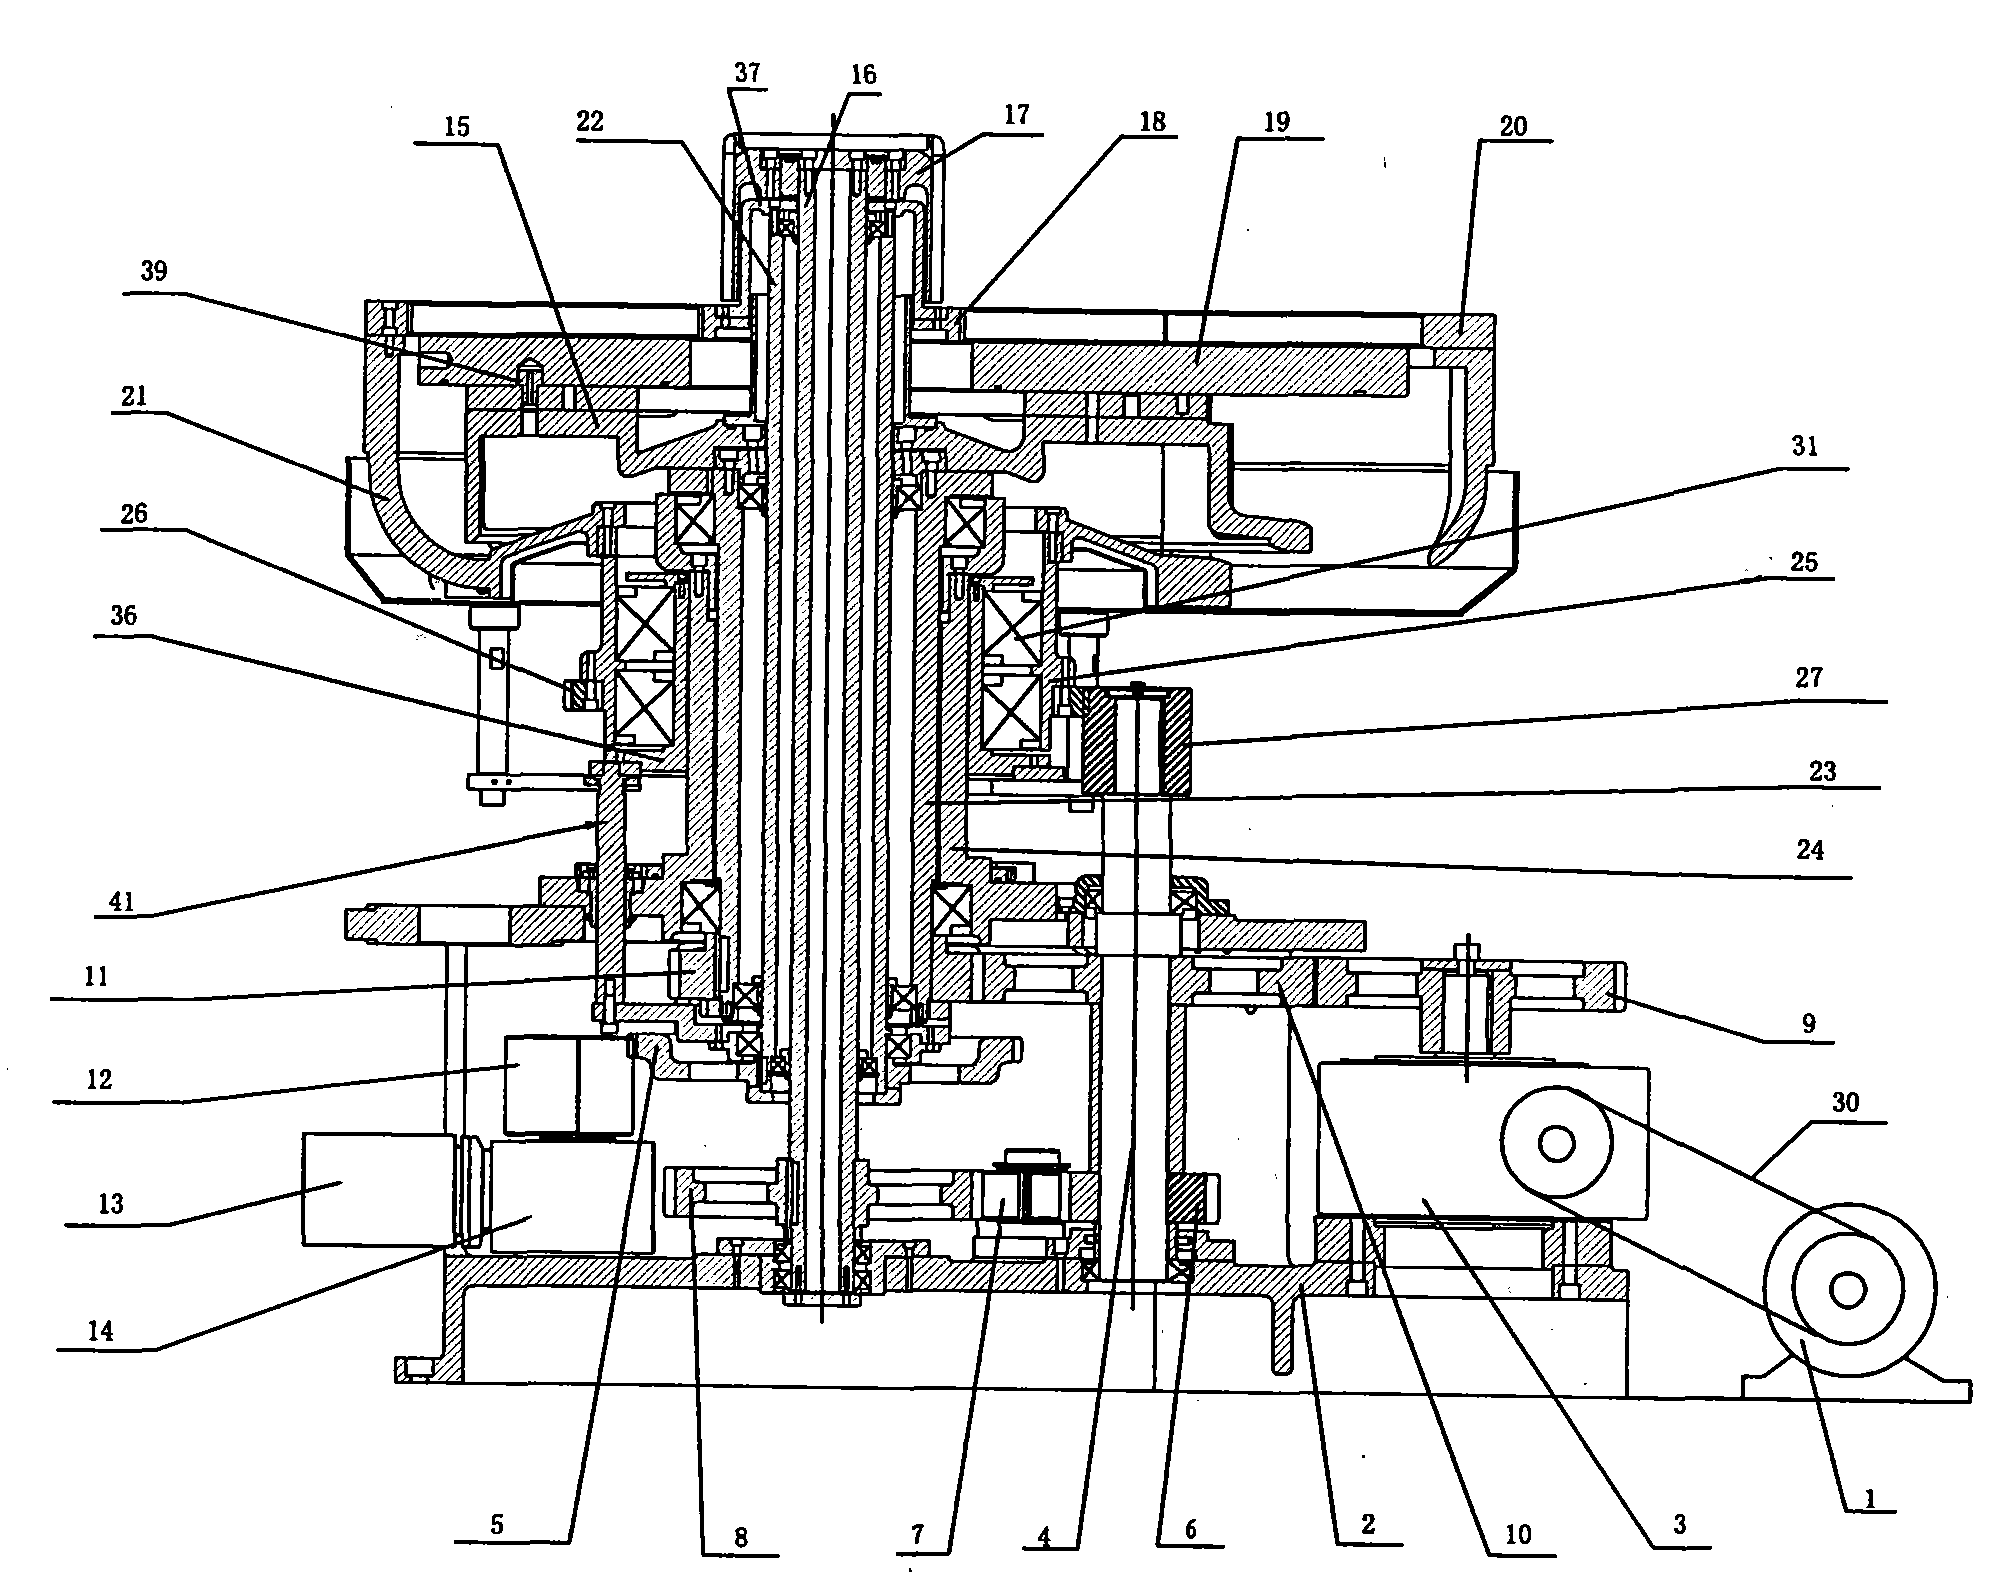 Mainshaft transmission system of numerically-controlled precise grinding polisher